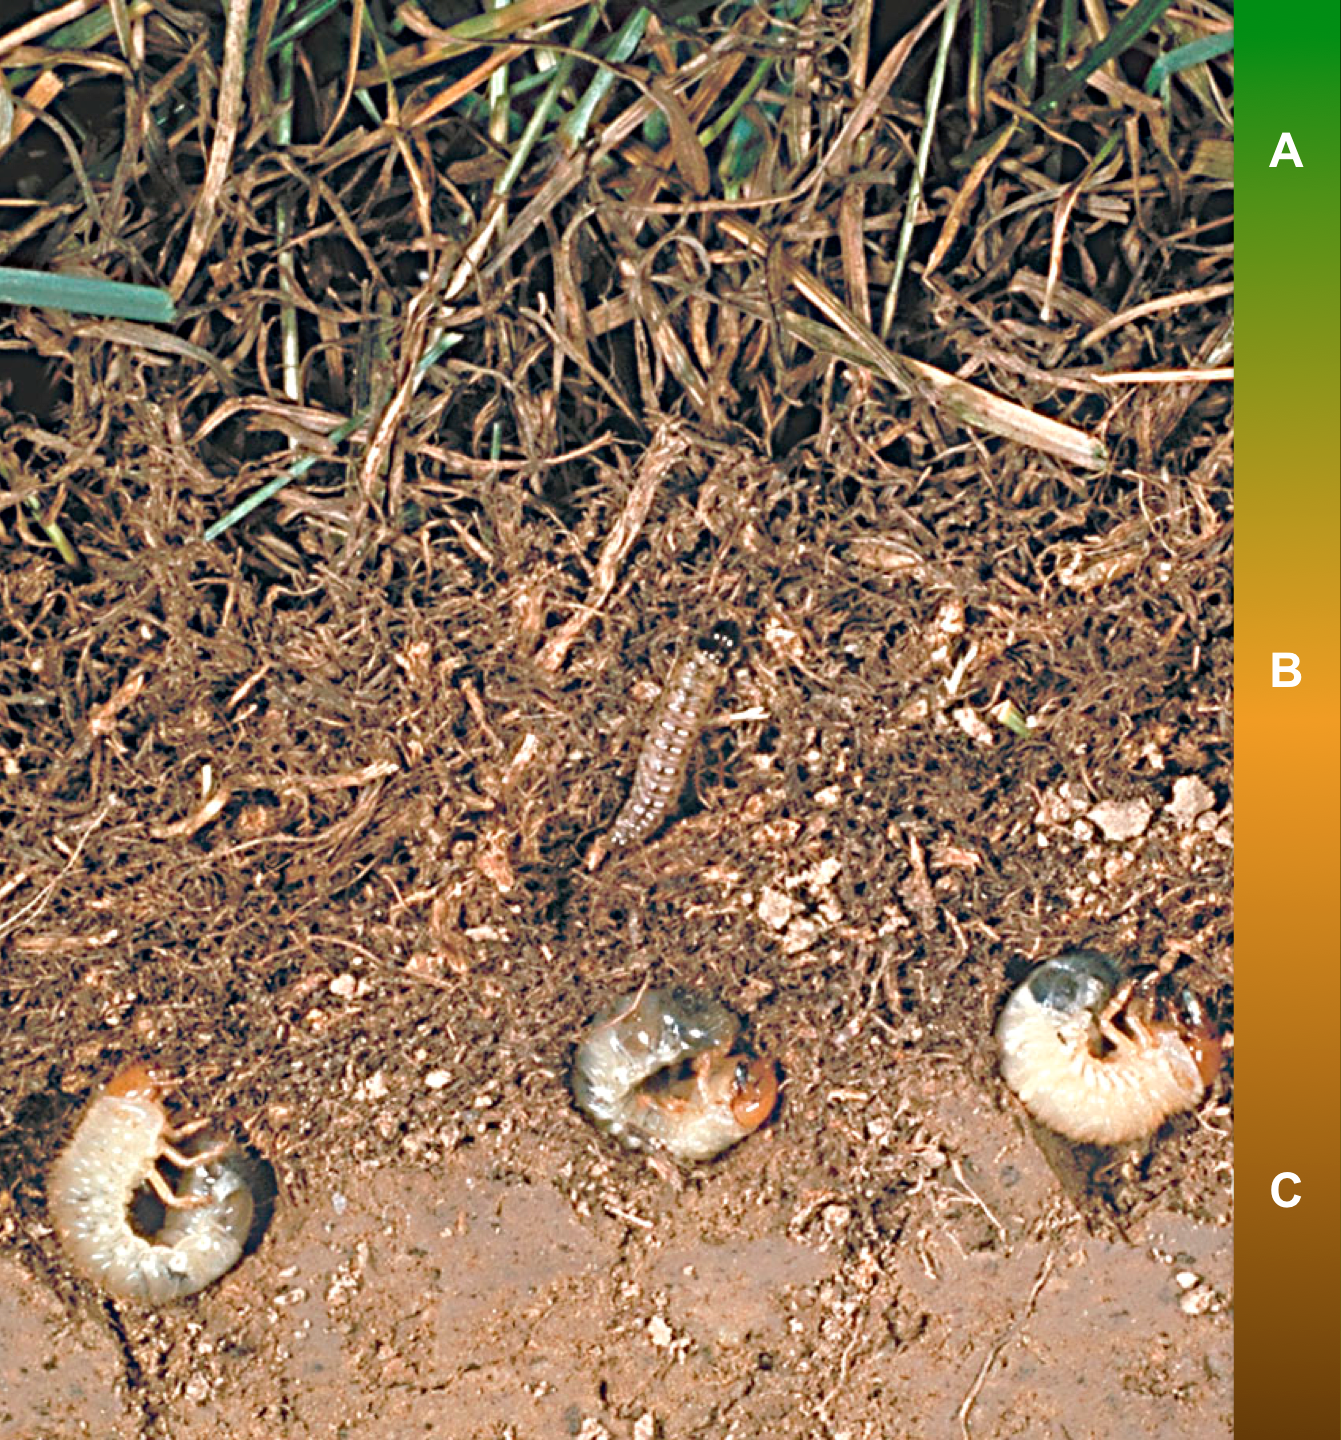 Figure 3. Cross-sectional view of the turfgrass environment and representative insect pests. Note the three distinct target zones; A) stem and leaf, B) thatch, and C) soil. Insects inhabiting zones A and B are considered above-ground insects whereas those inhabiting zone C are below-ground insects.